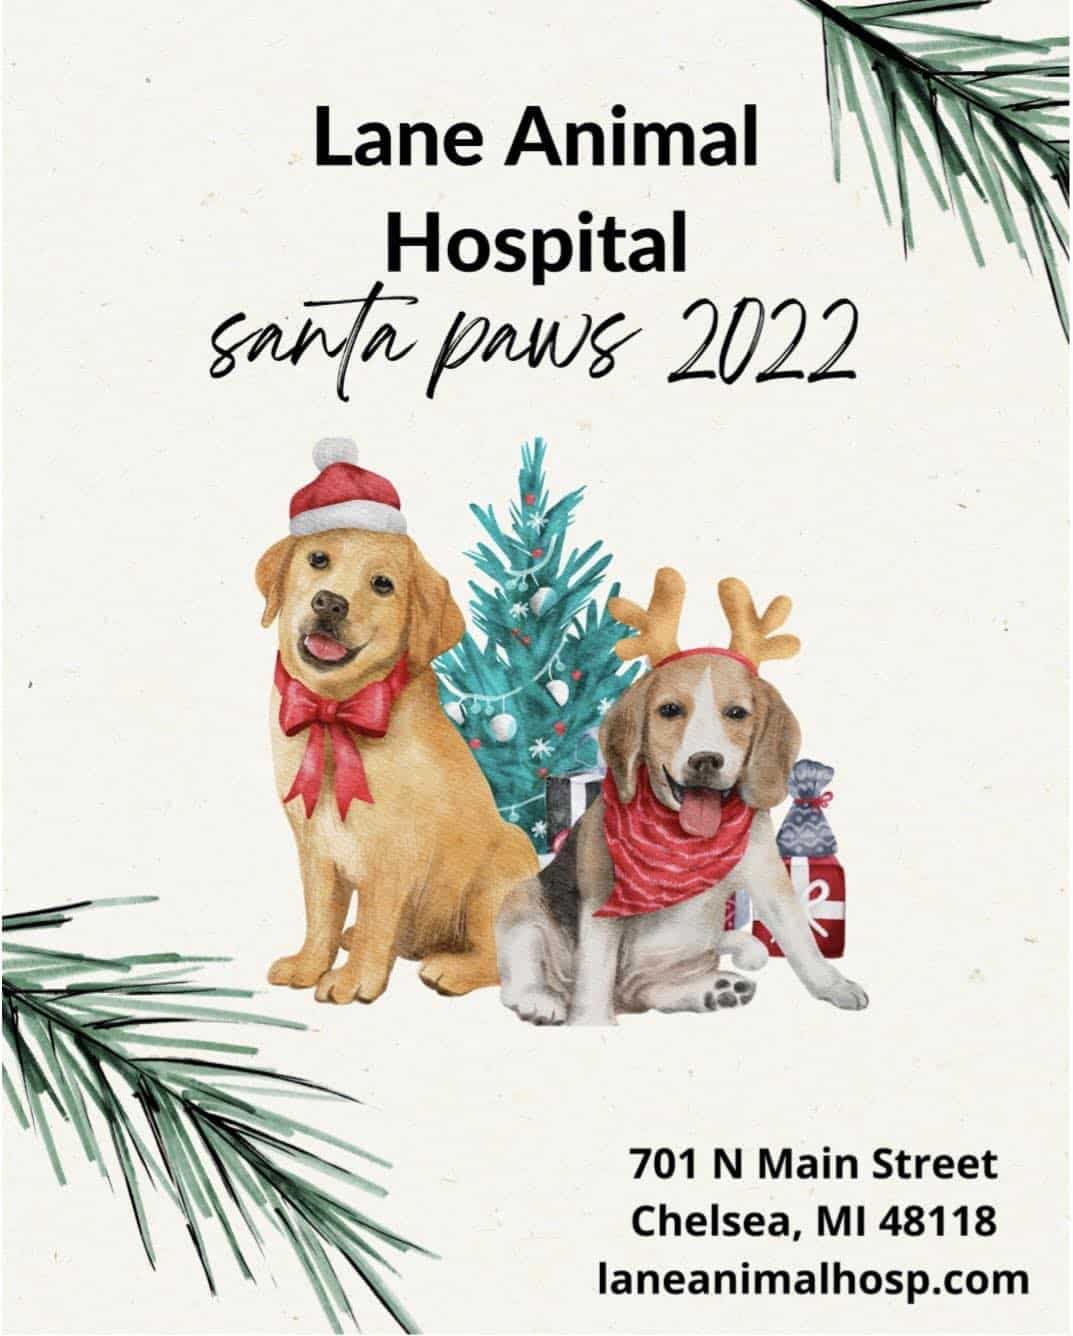 Bring Your Pet to the Lane Animal Hospital Christmas Photo Booth - Chelsea  Update: Chelsea, Michigan, News